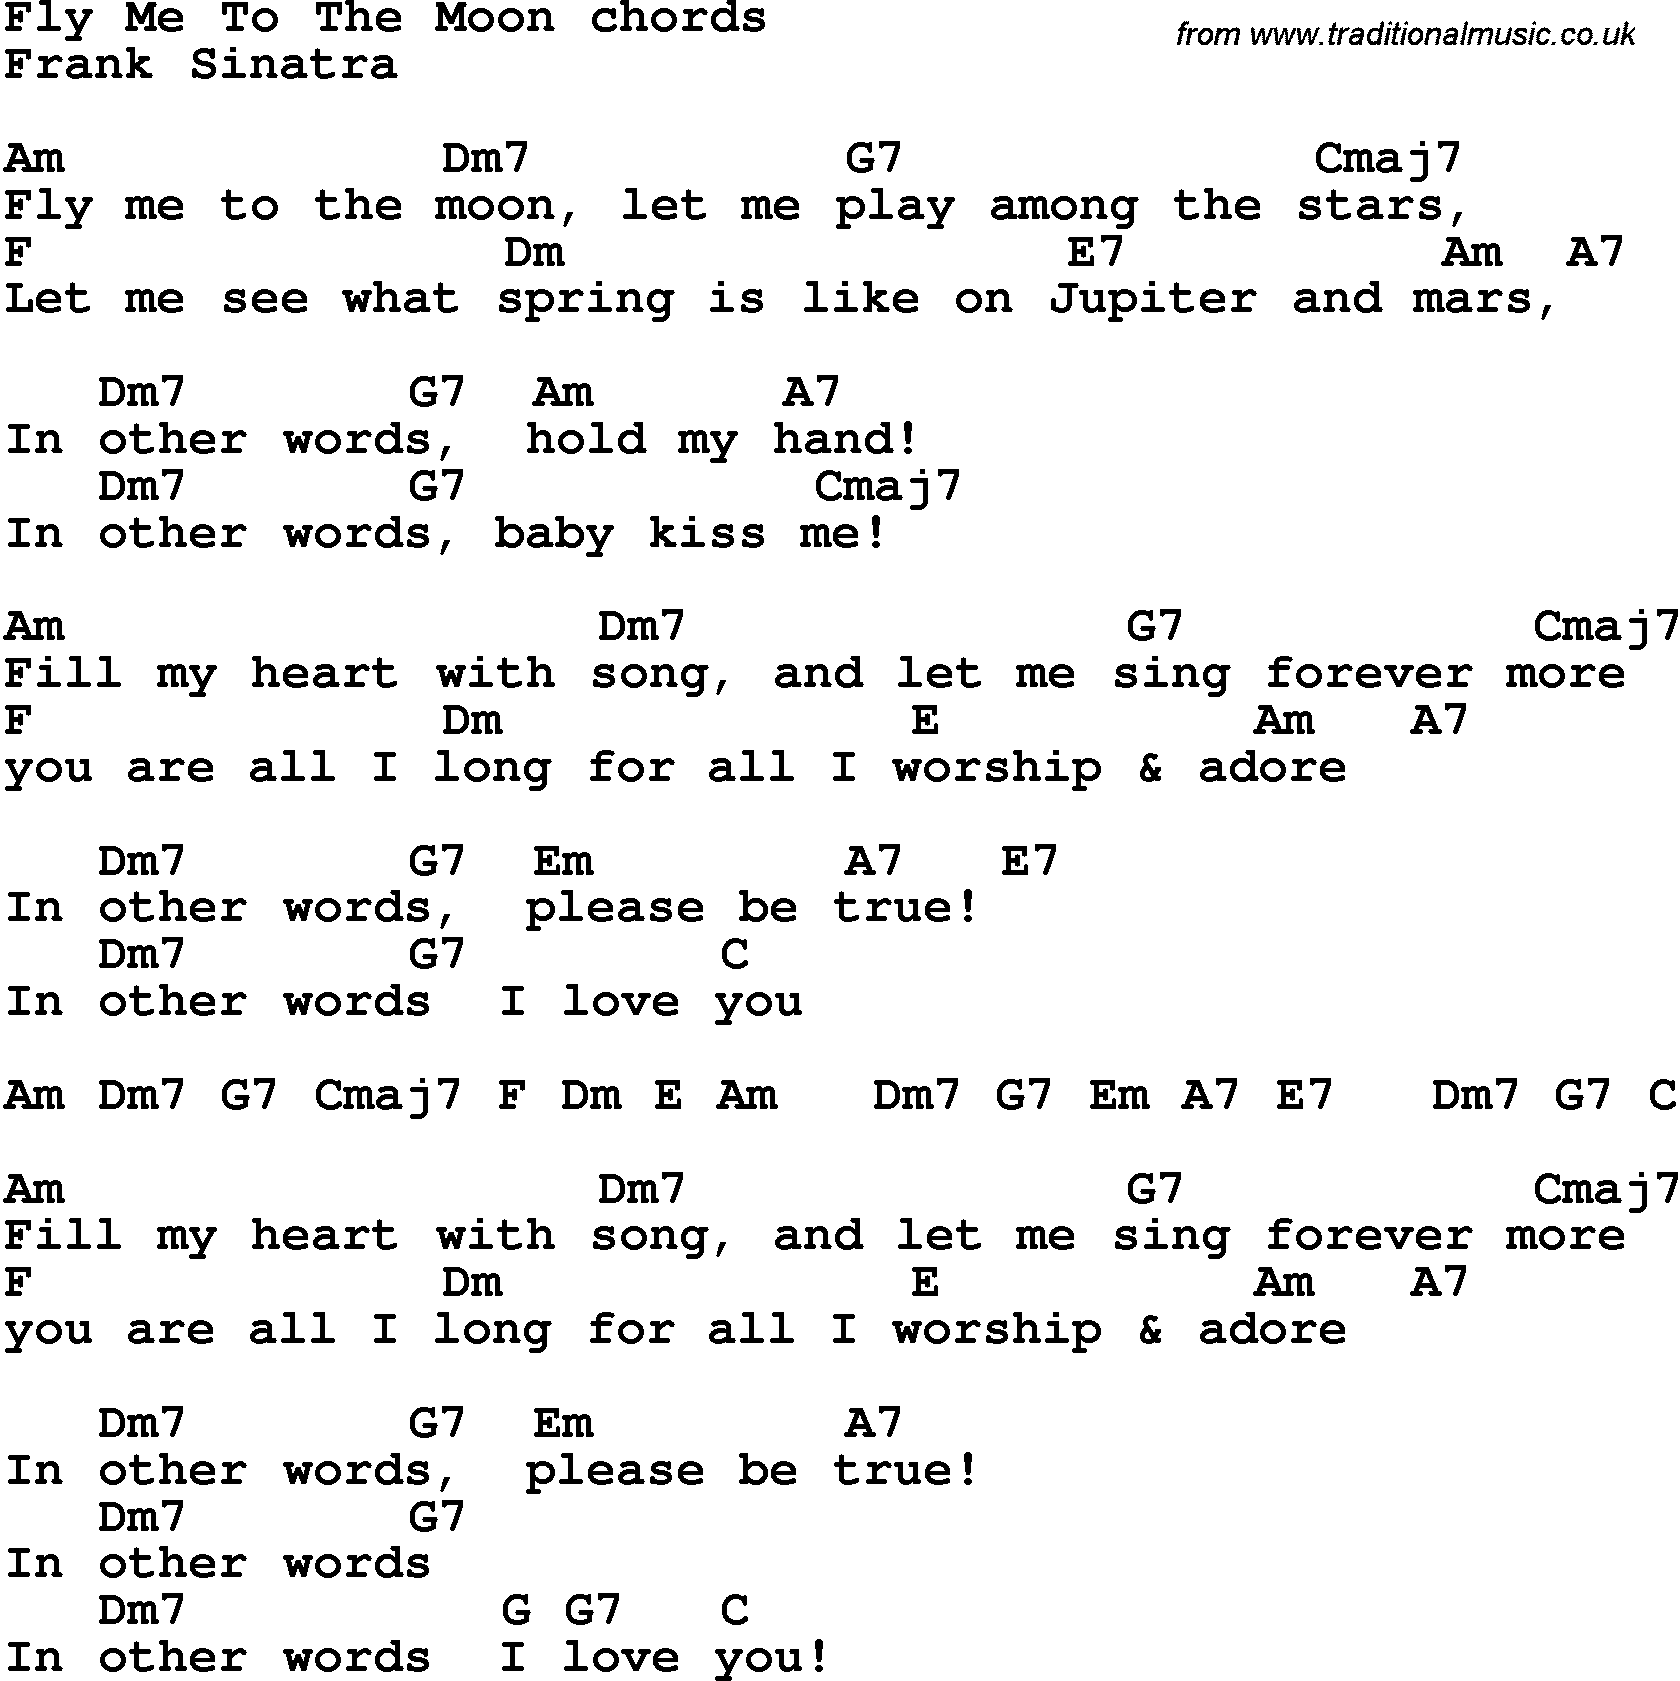 Song Lyrics with guitar chords for Fly Me To The Moon - Frank Sinatra